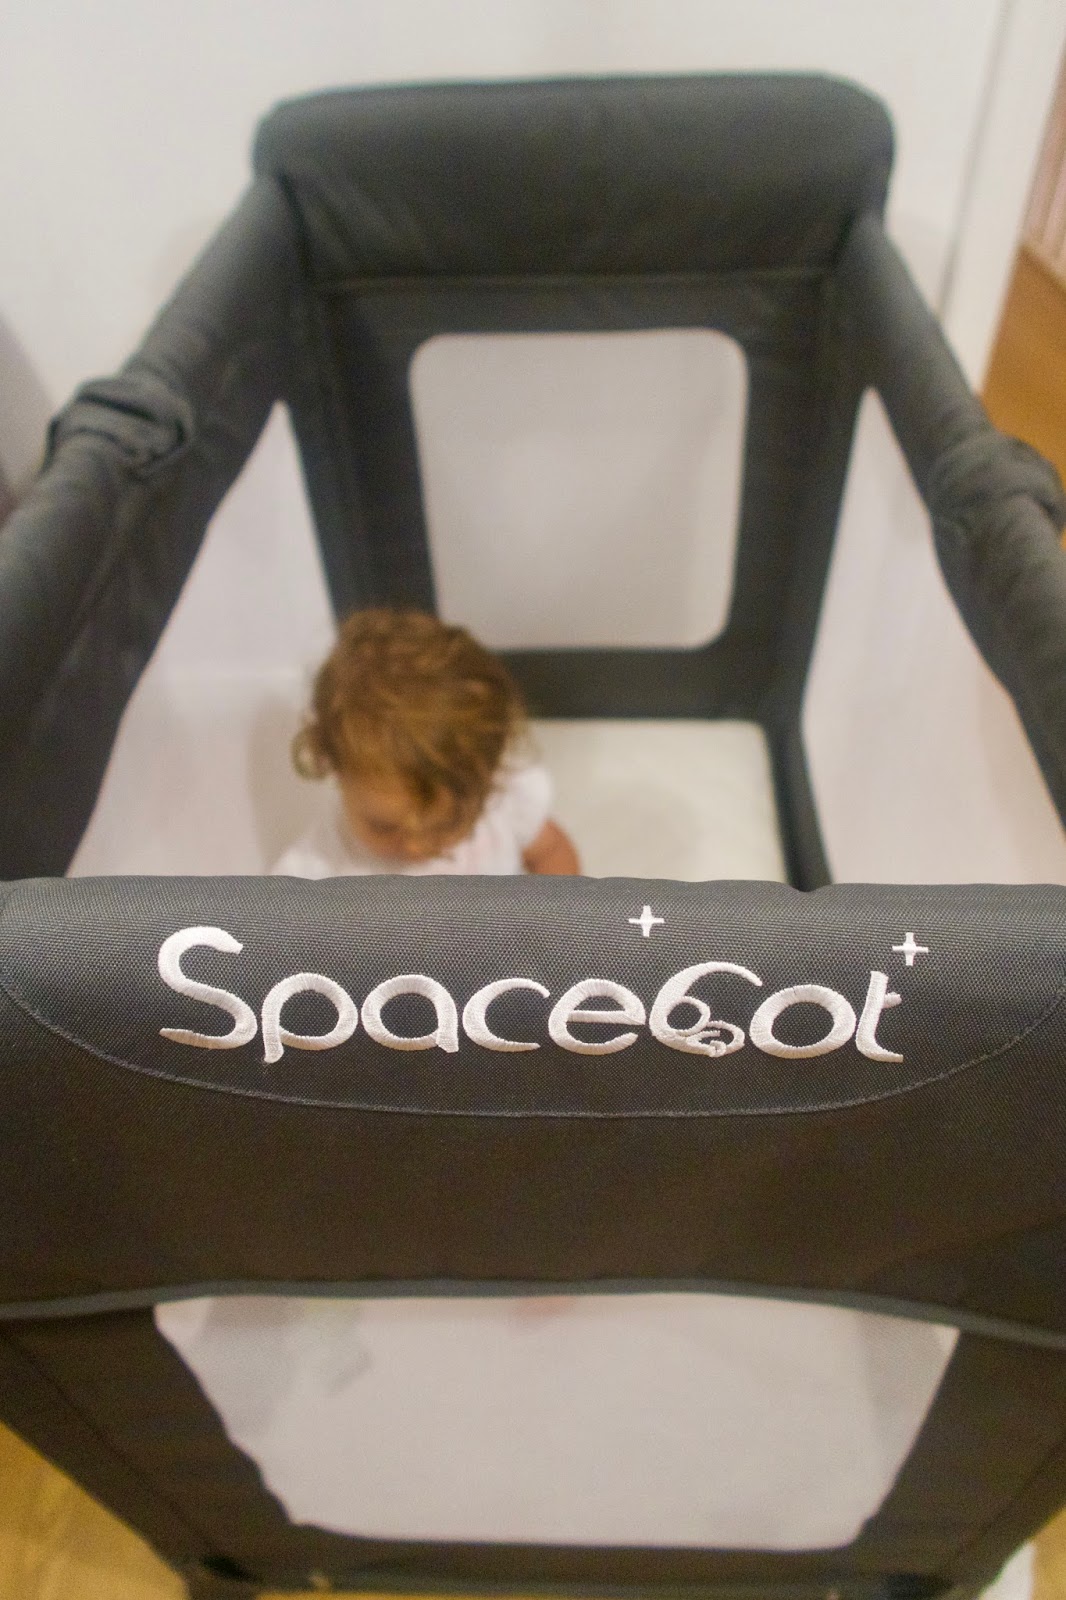 spacecot travel cot mattress size